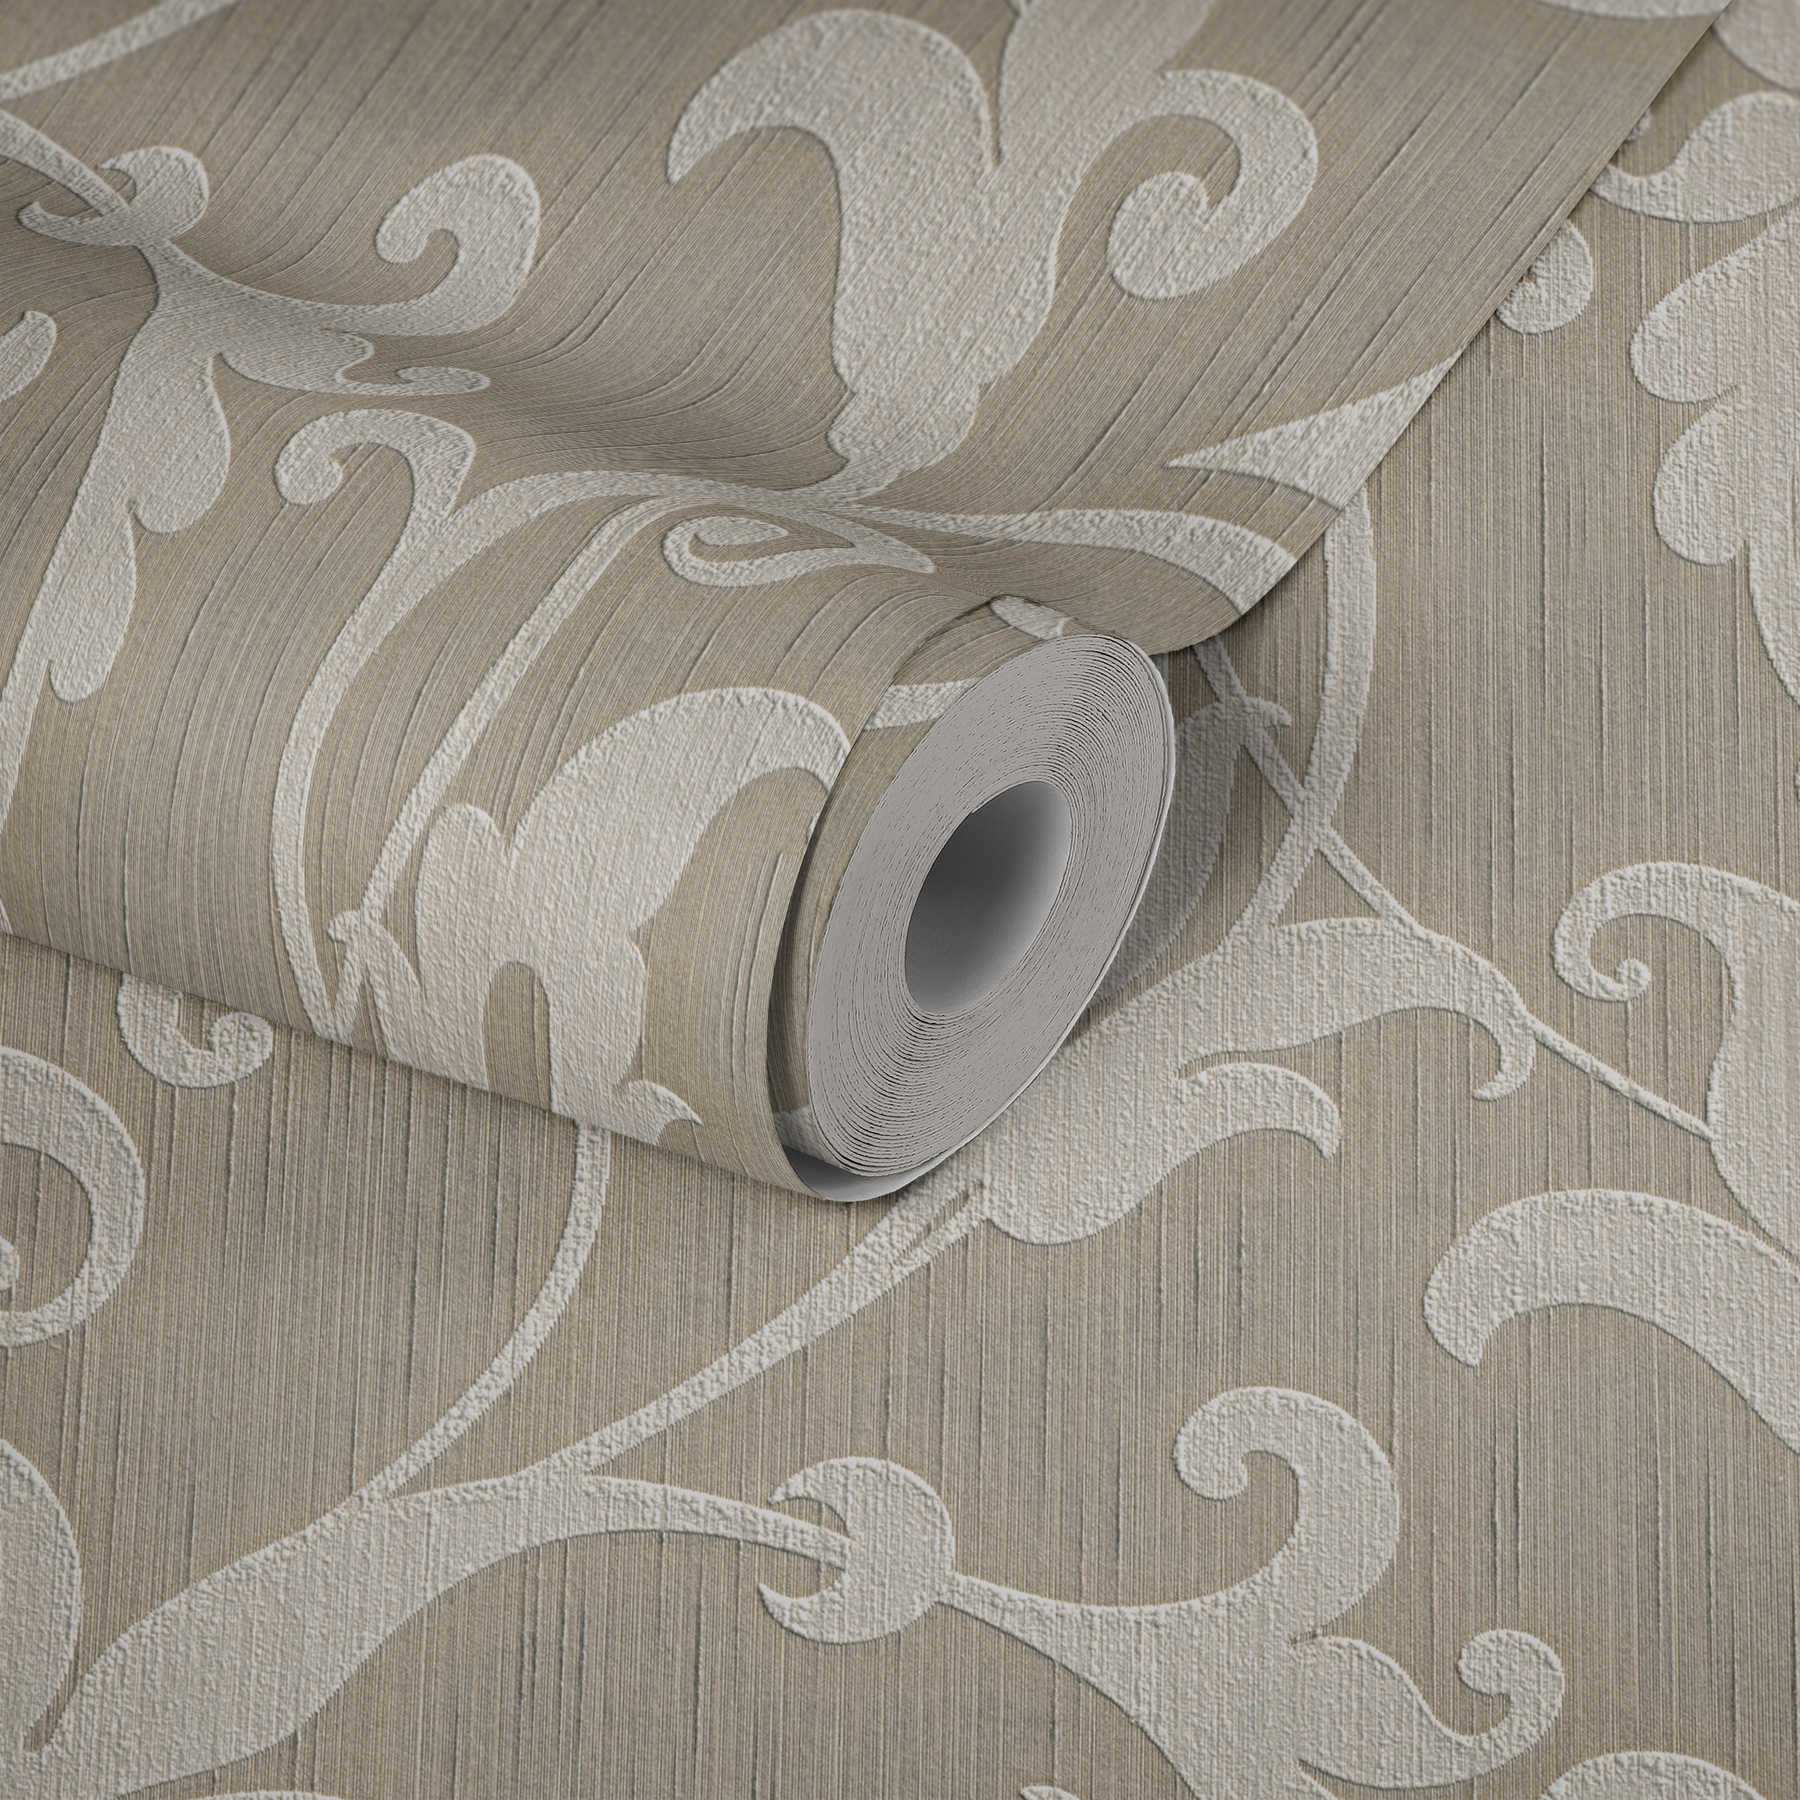             Textile wallpaper embossed with ornaments - beige, silver
        